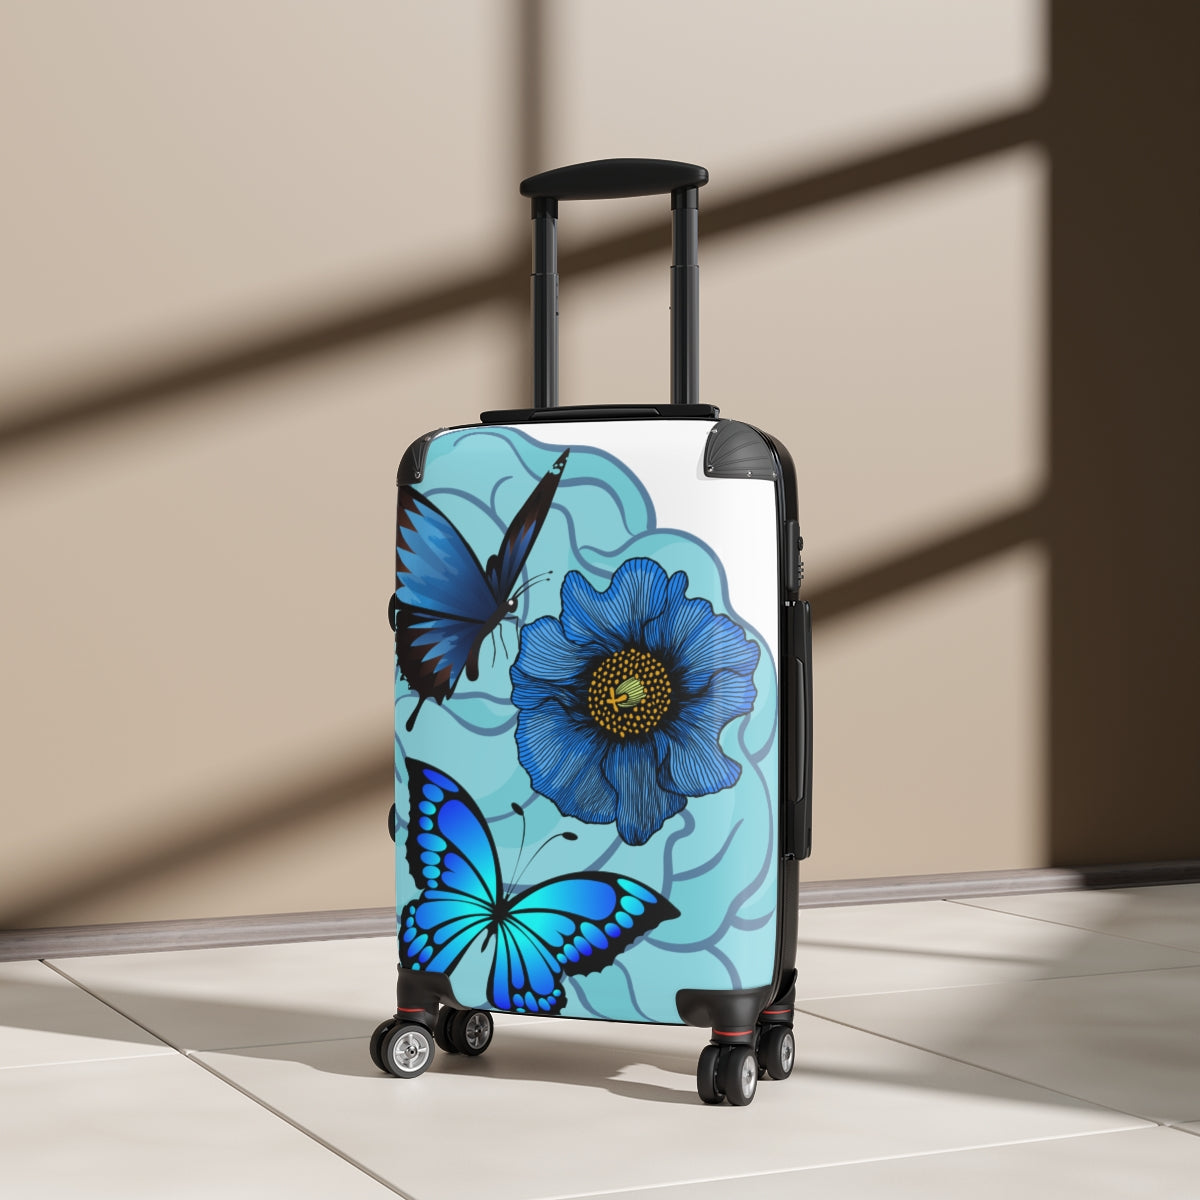 CARRY-ON LUGGAGE, CABIN SUITCASE, BLUE FLORAL BUTTERFLY, WOMEN'S CARRY-ON, ARTZIRA